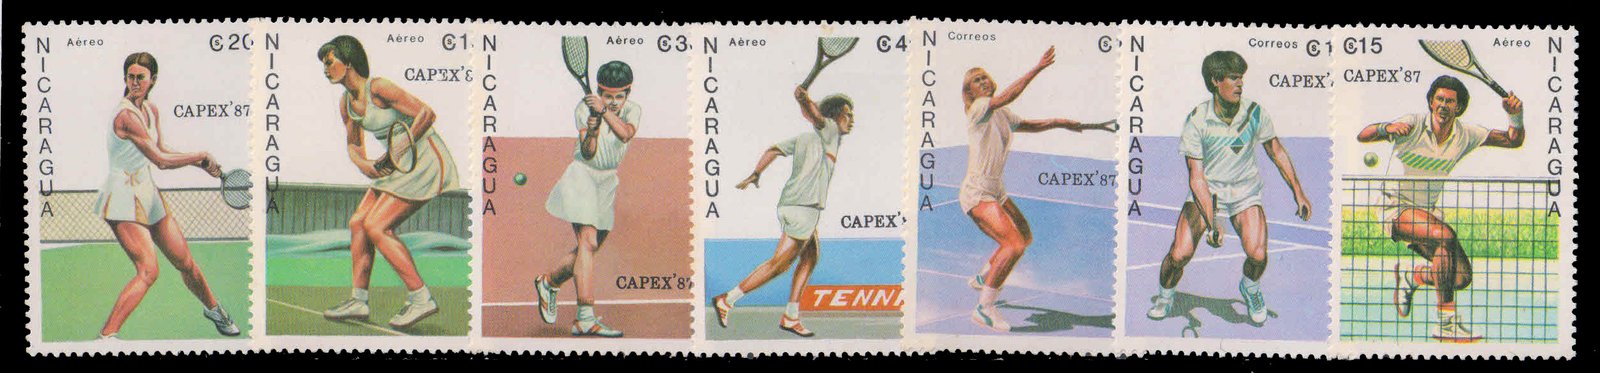 NICARAGUA 1987-CAPEX-87 Stamp Exhibition, Tennis Players-7 Value, MNH, S.G. 2870-76